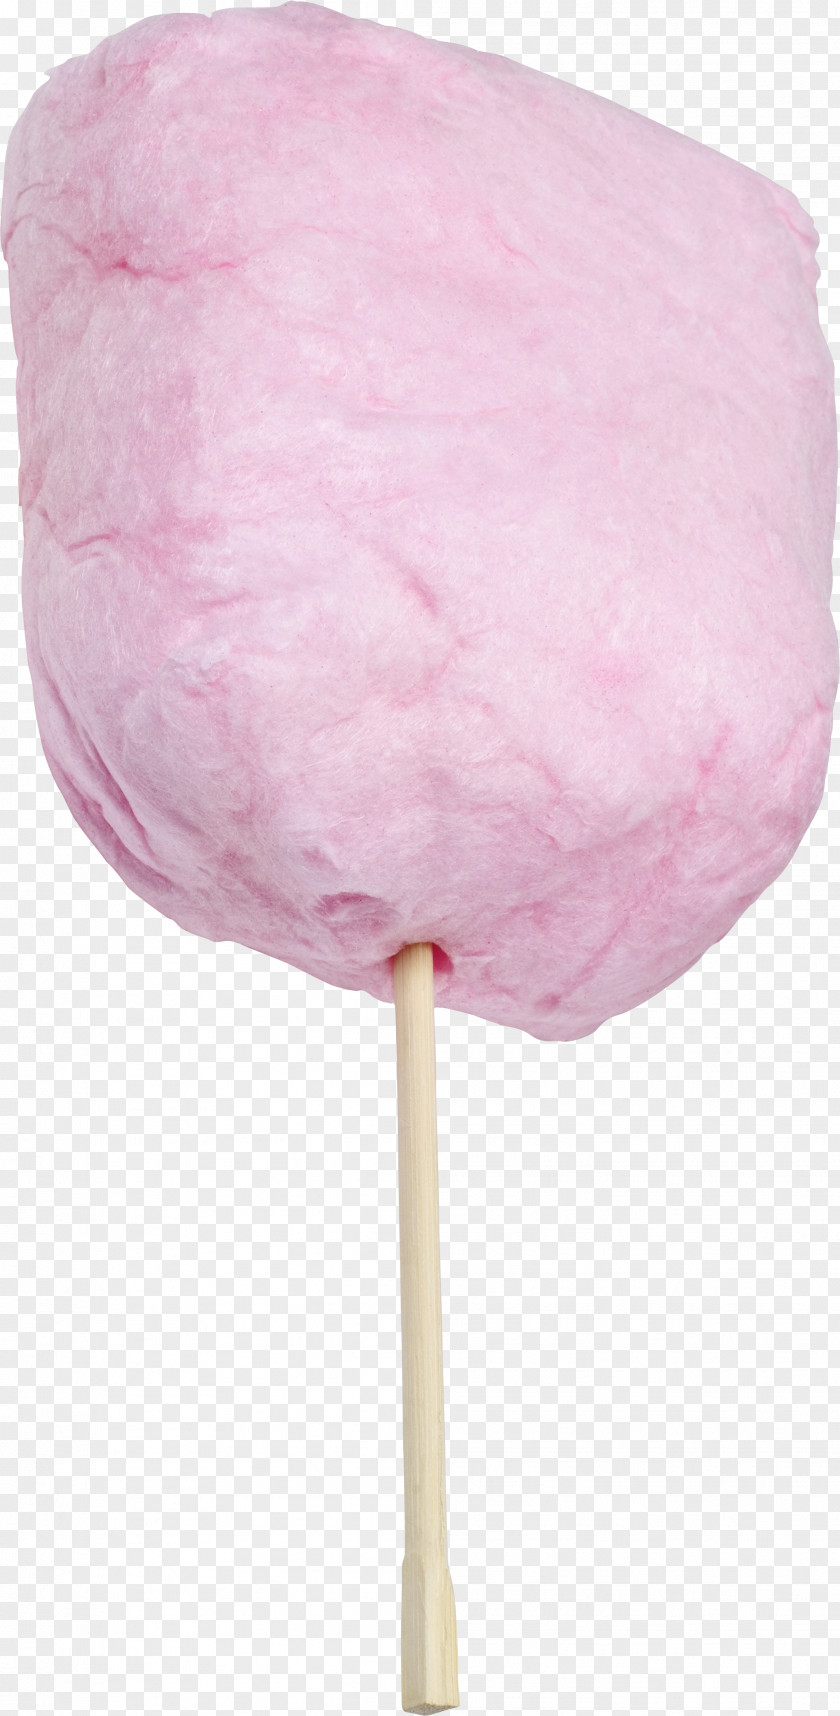 Candy Cotton Food Sugar Sweetness PNG